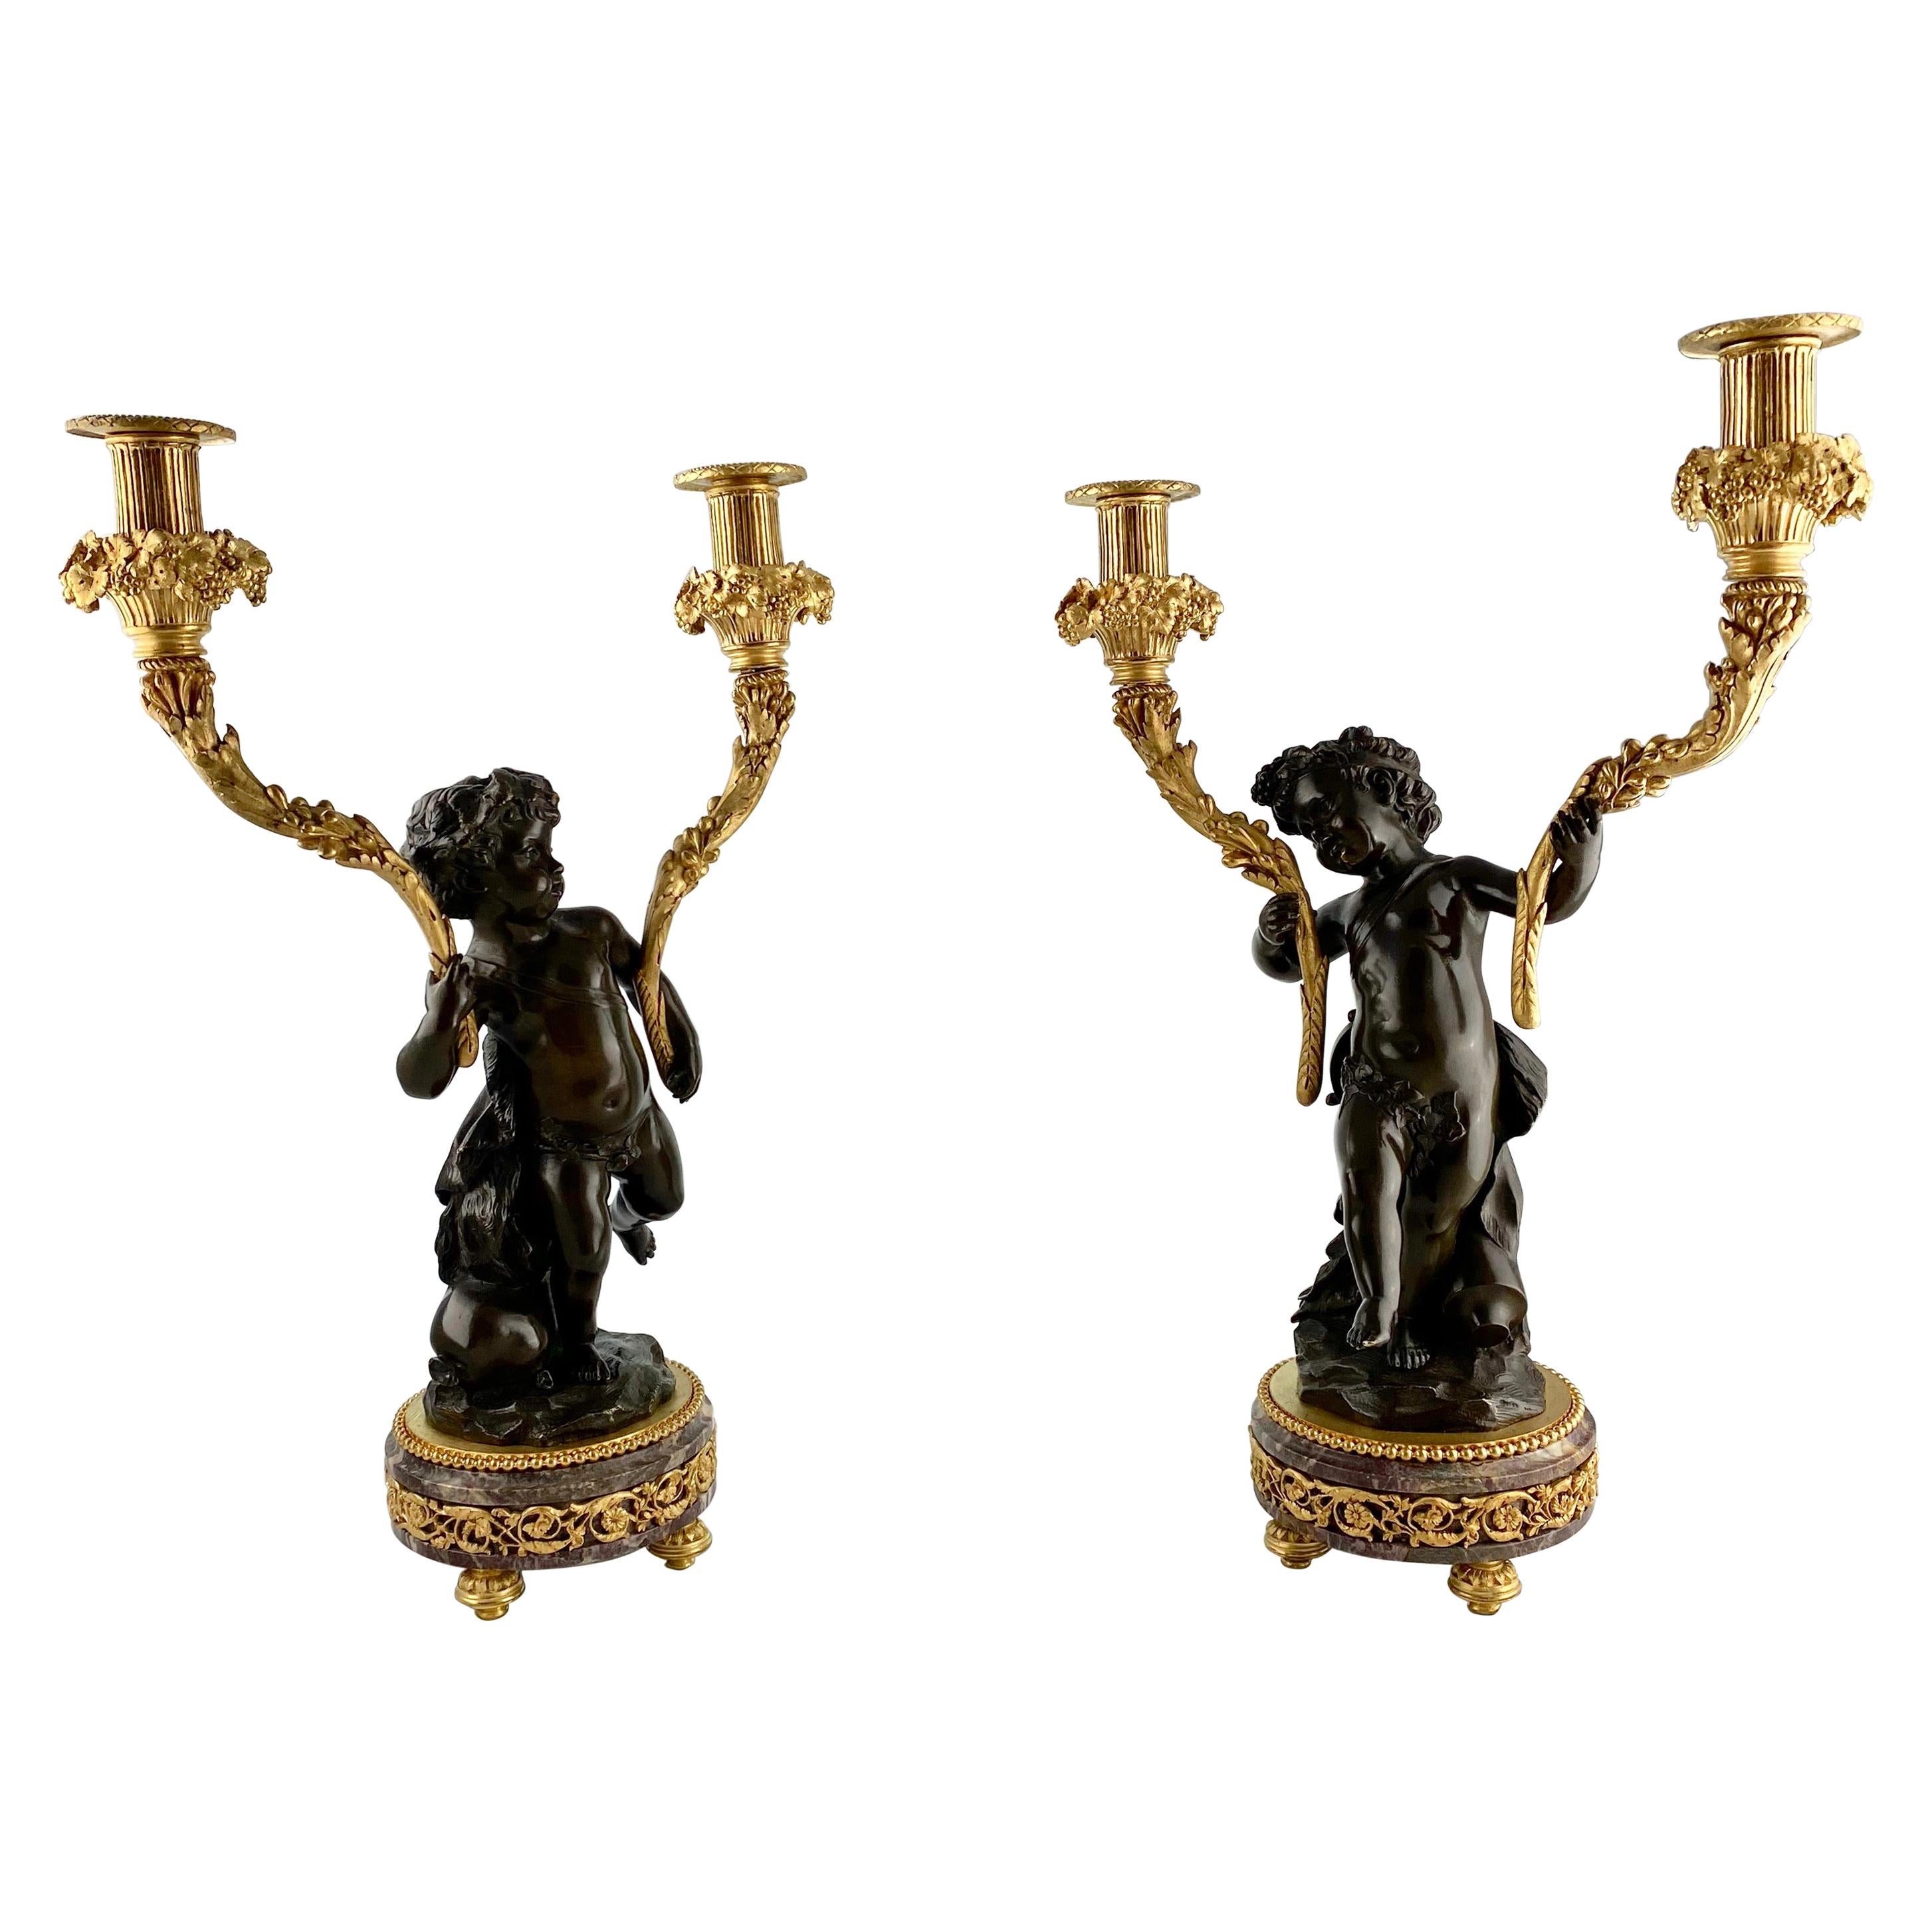 Pair of French Candelabra, Late 18th C